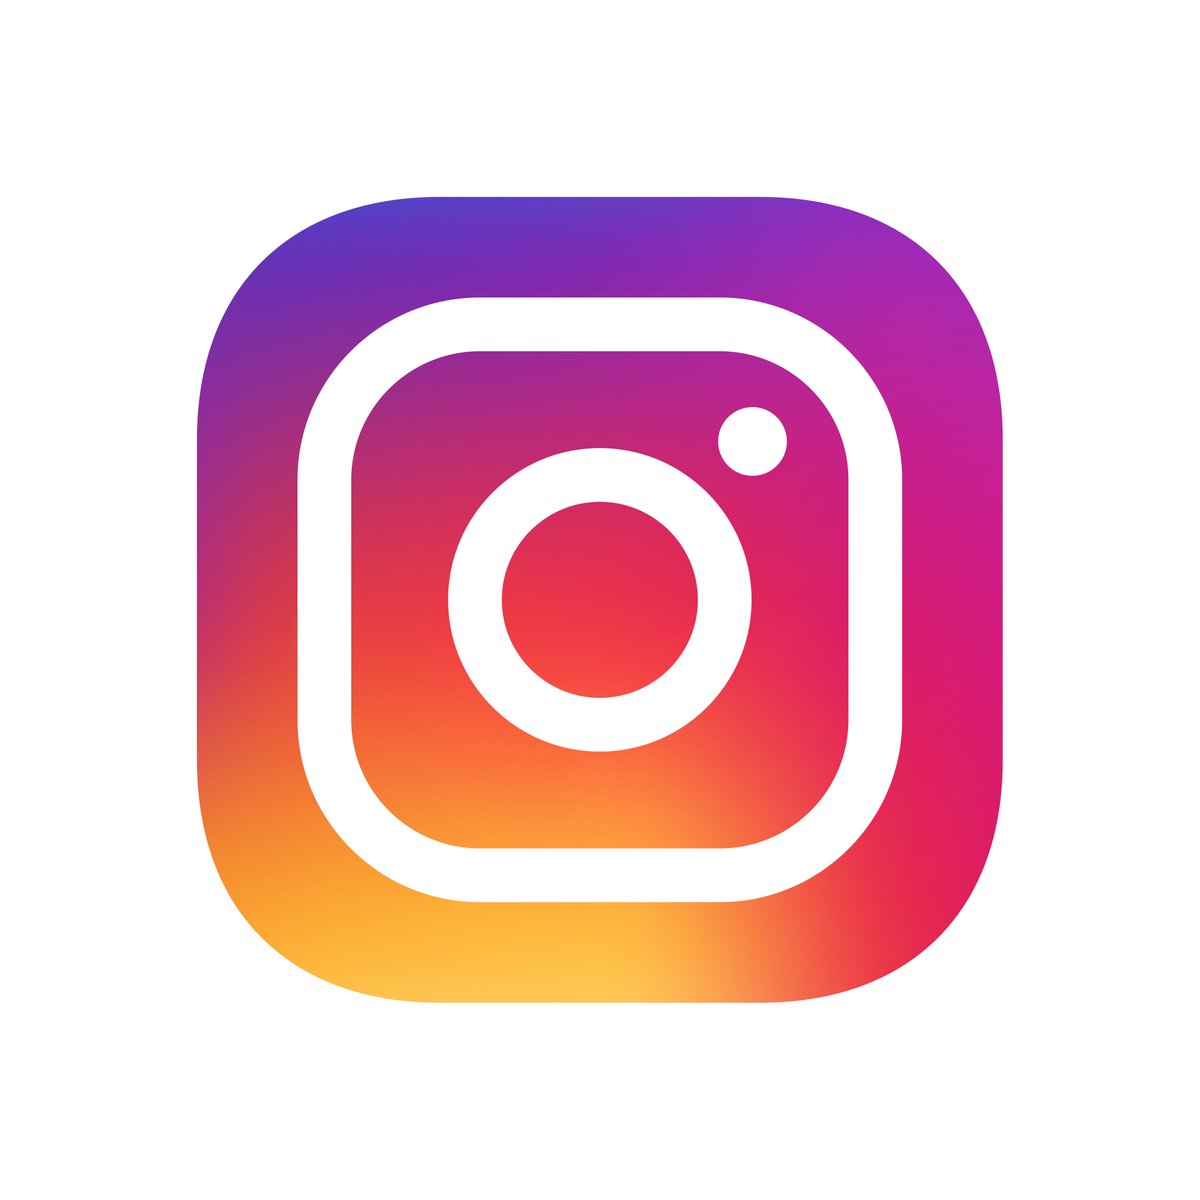 Did you know? NCBP is now on Instagram!!

With a new website comes a new social media account! Feel free to give us a follow so you can keep up with what we have going on over there. And tell your friends so you can help us get the word out 🎤 loom.ly/eP3LaHY